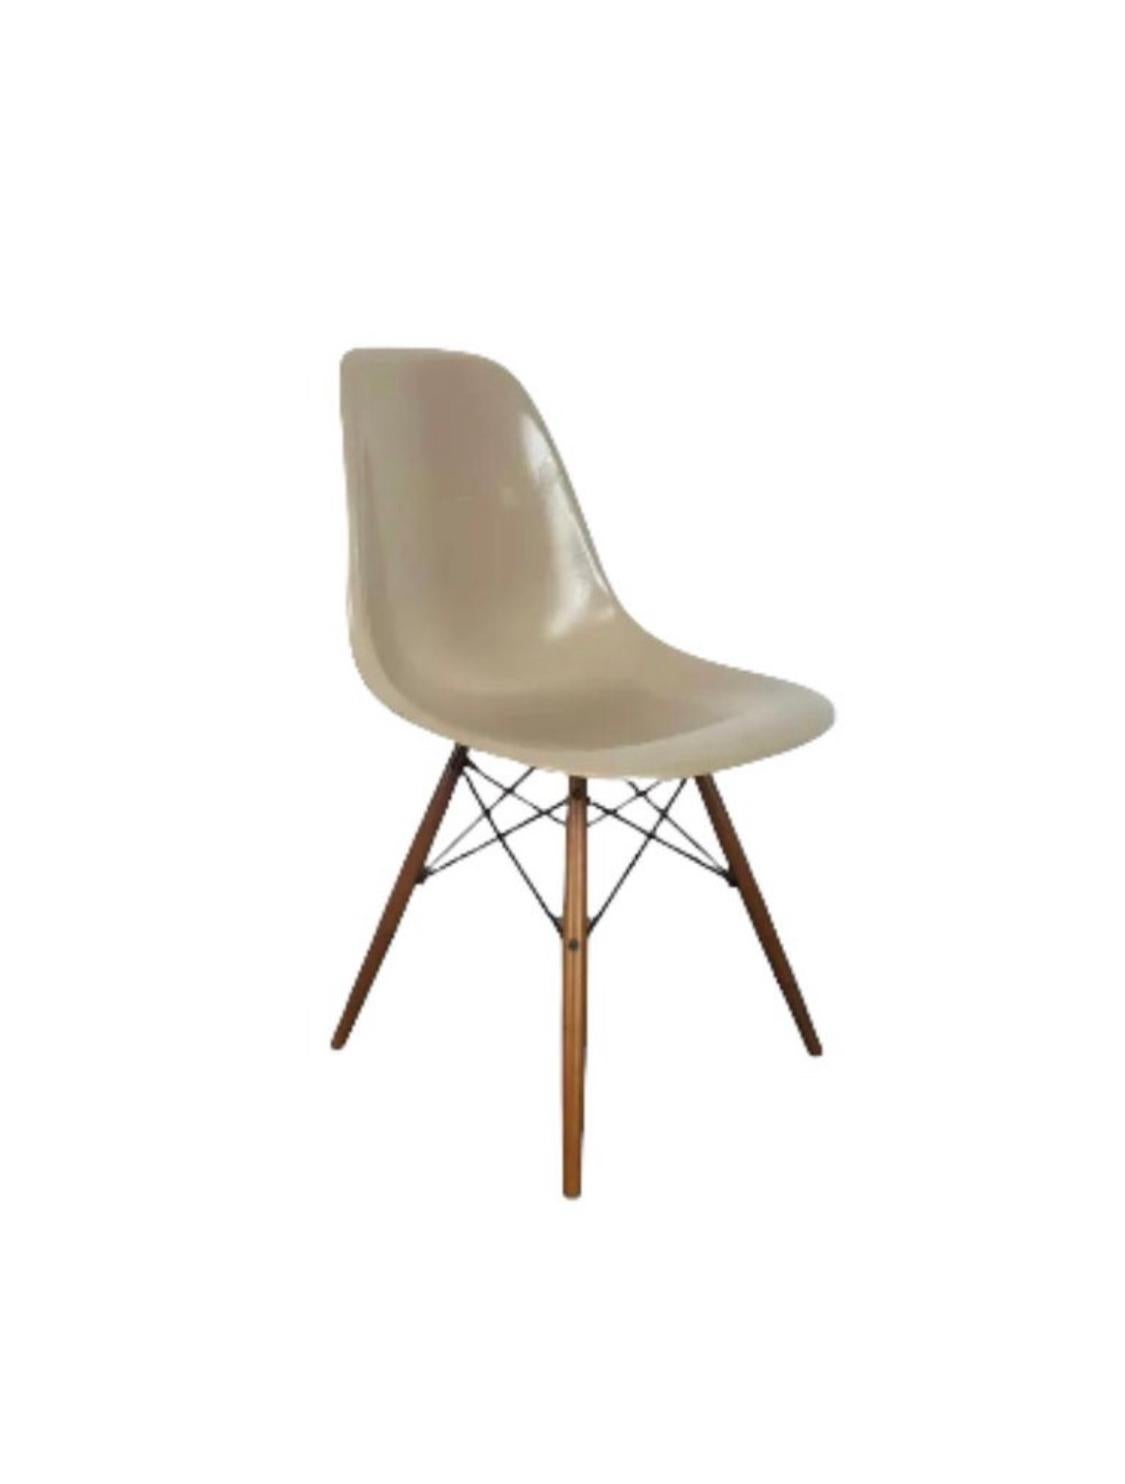 Herman Miller fiberglass dining chairs designed by Charles and Ray Eames. All in matching “greige” color, which is elegant and complements all decor and color schemes. Signed and guaranteed authentic. Complete with brand new American made walnut